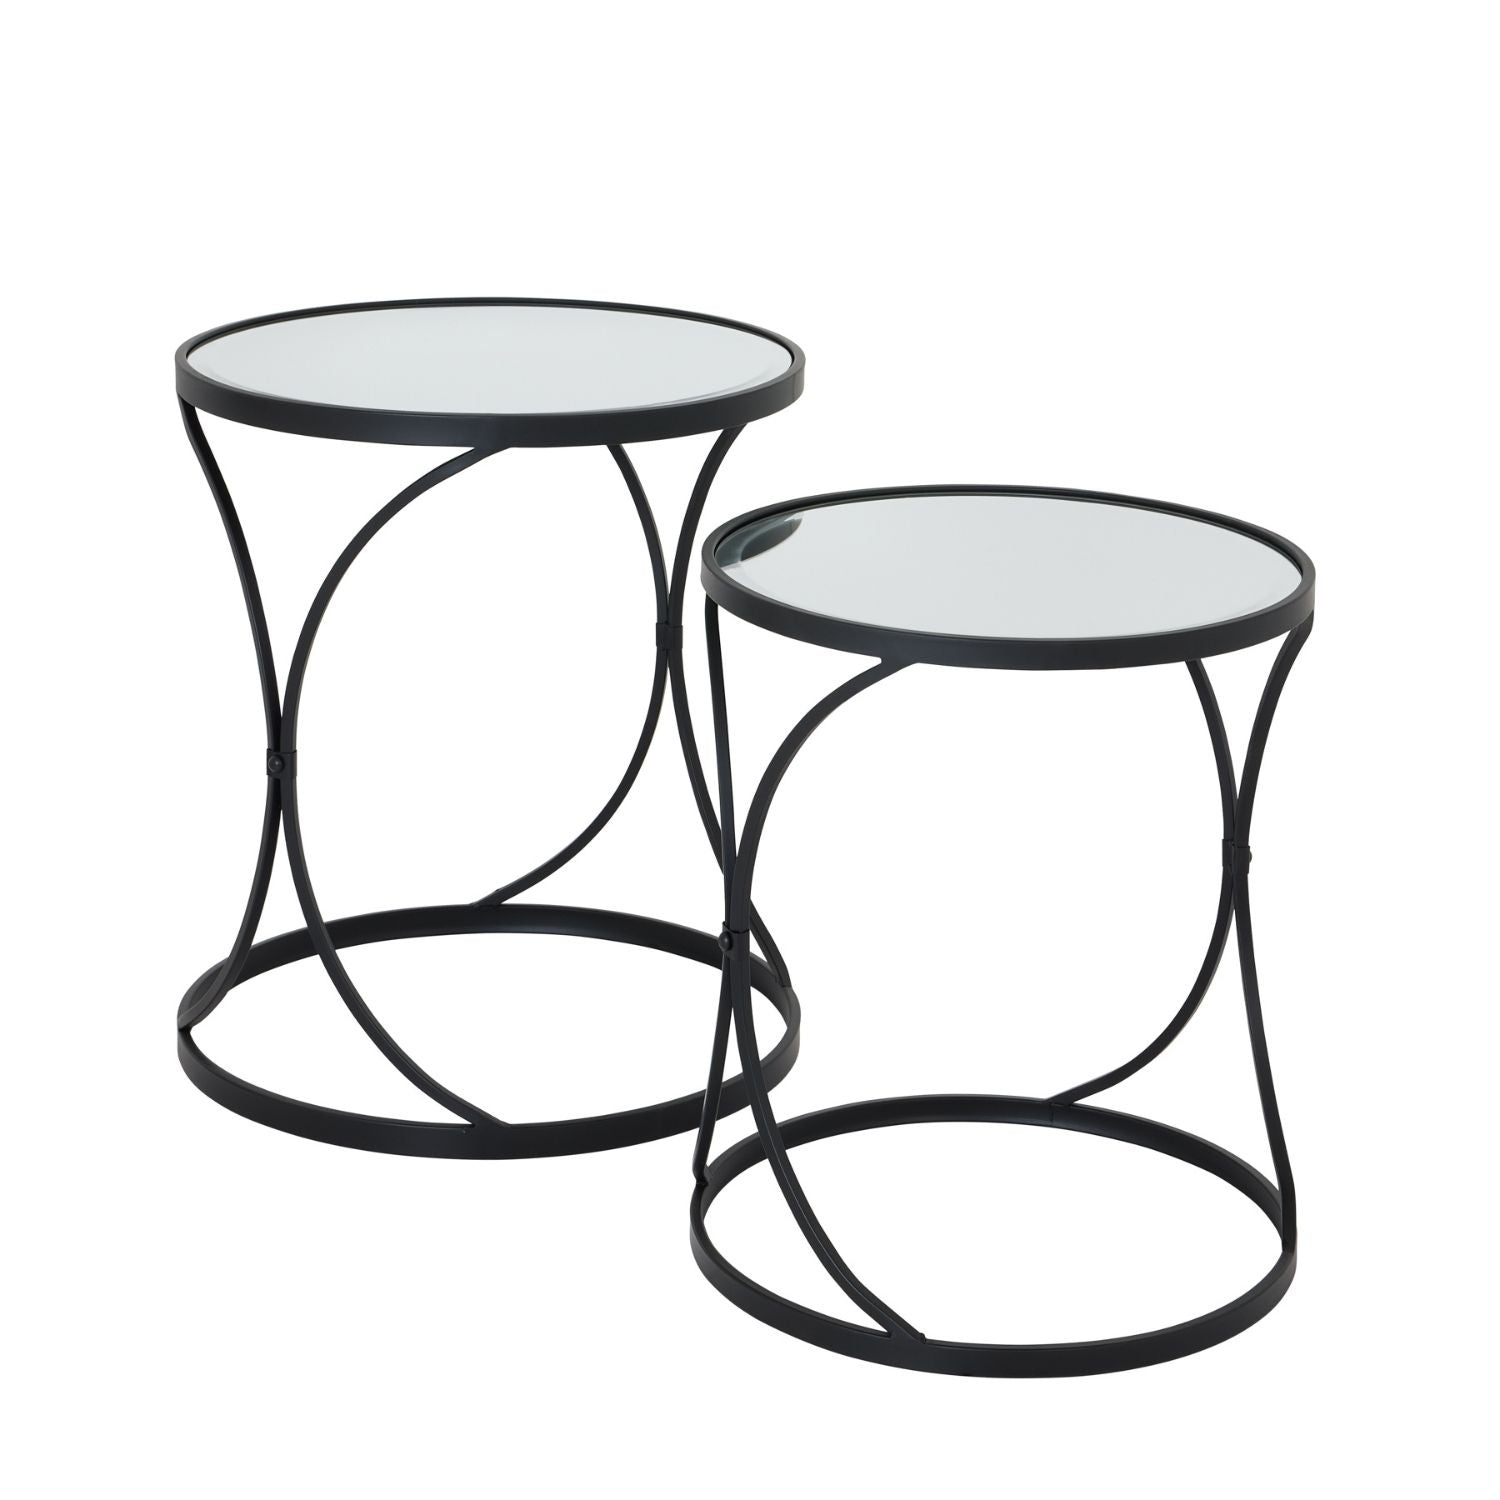 Two black side tables with mirrored tops